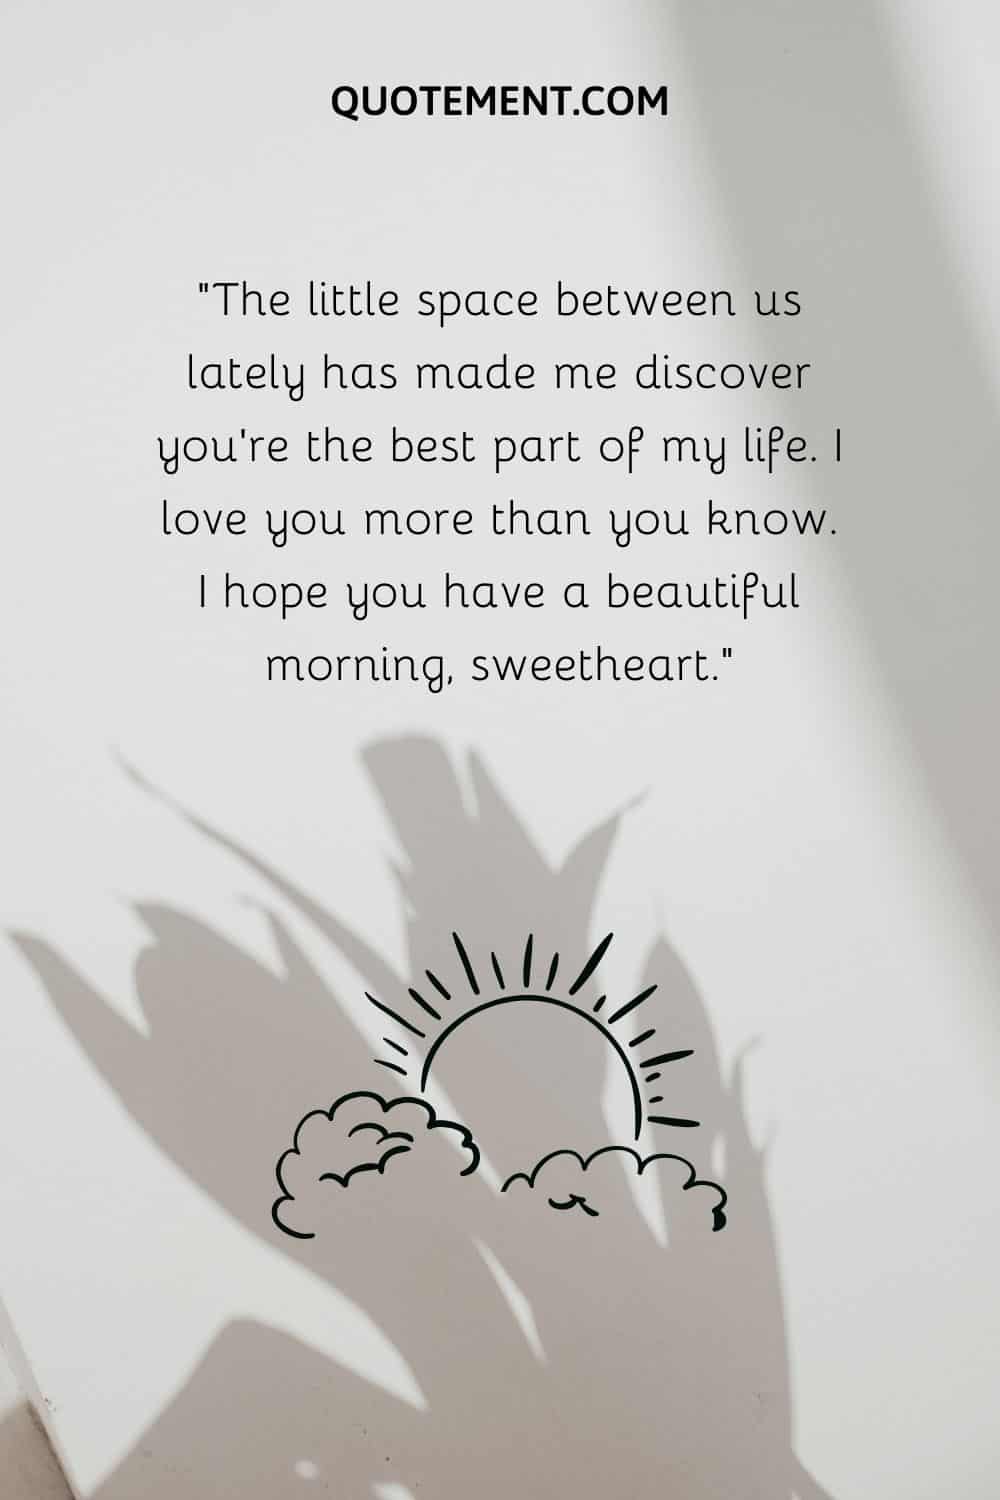 “The little space between us lately has made me discover you’re the best part of my life.